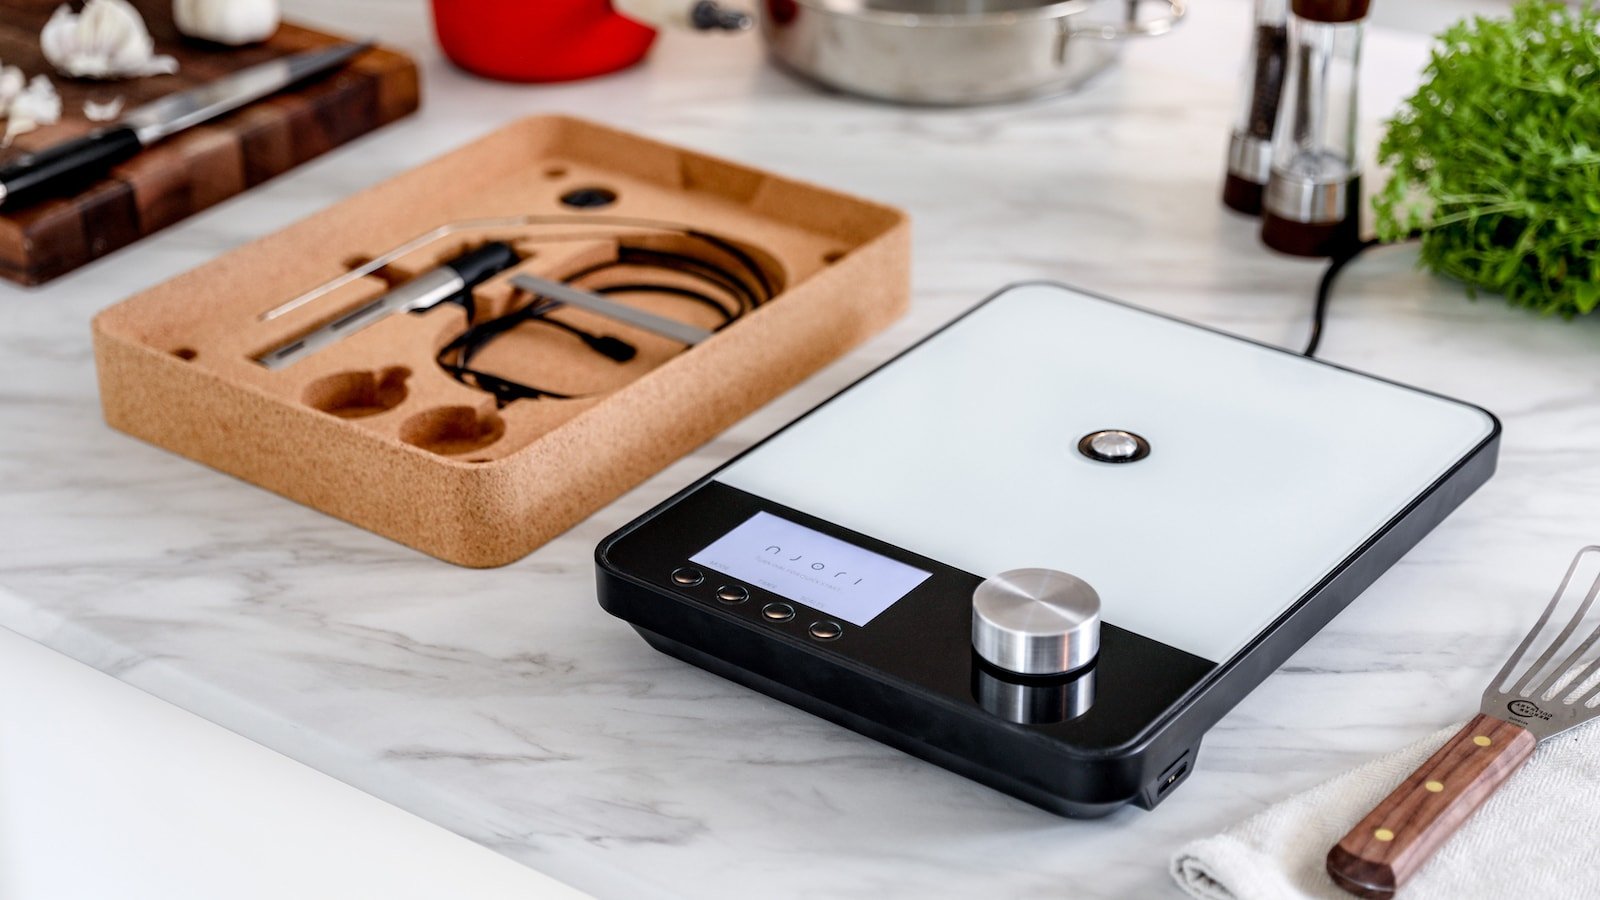 Njori Tempo smart cooker measures, monitors, and regulates temperature for great meals